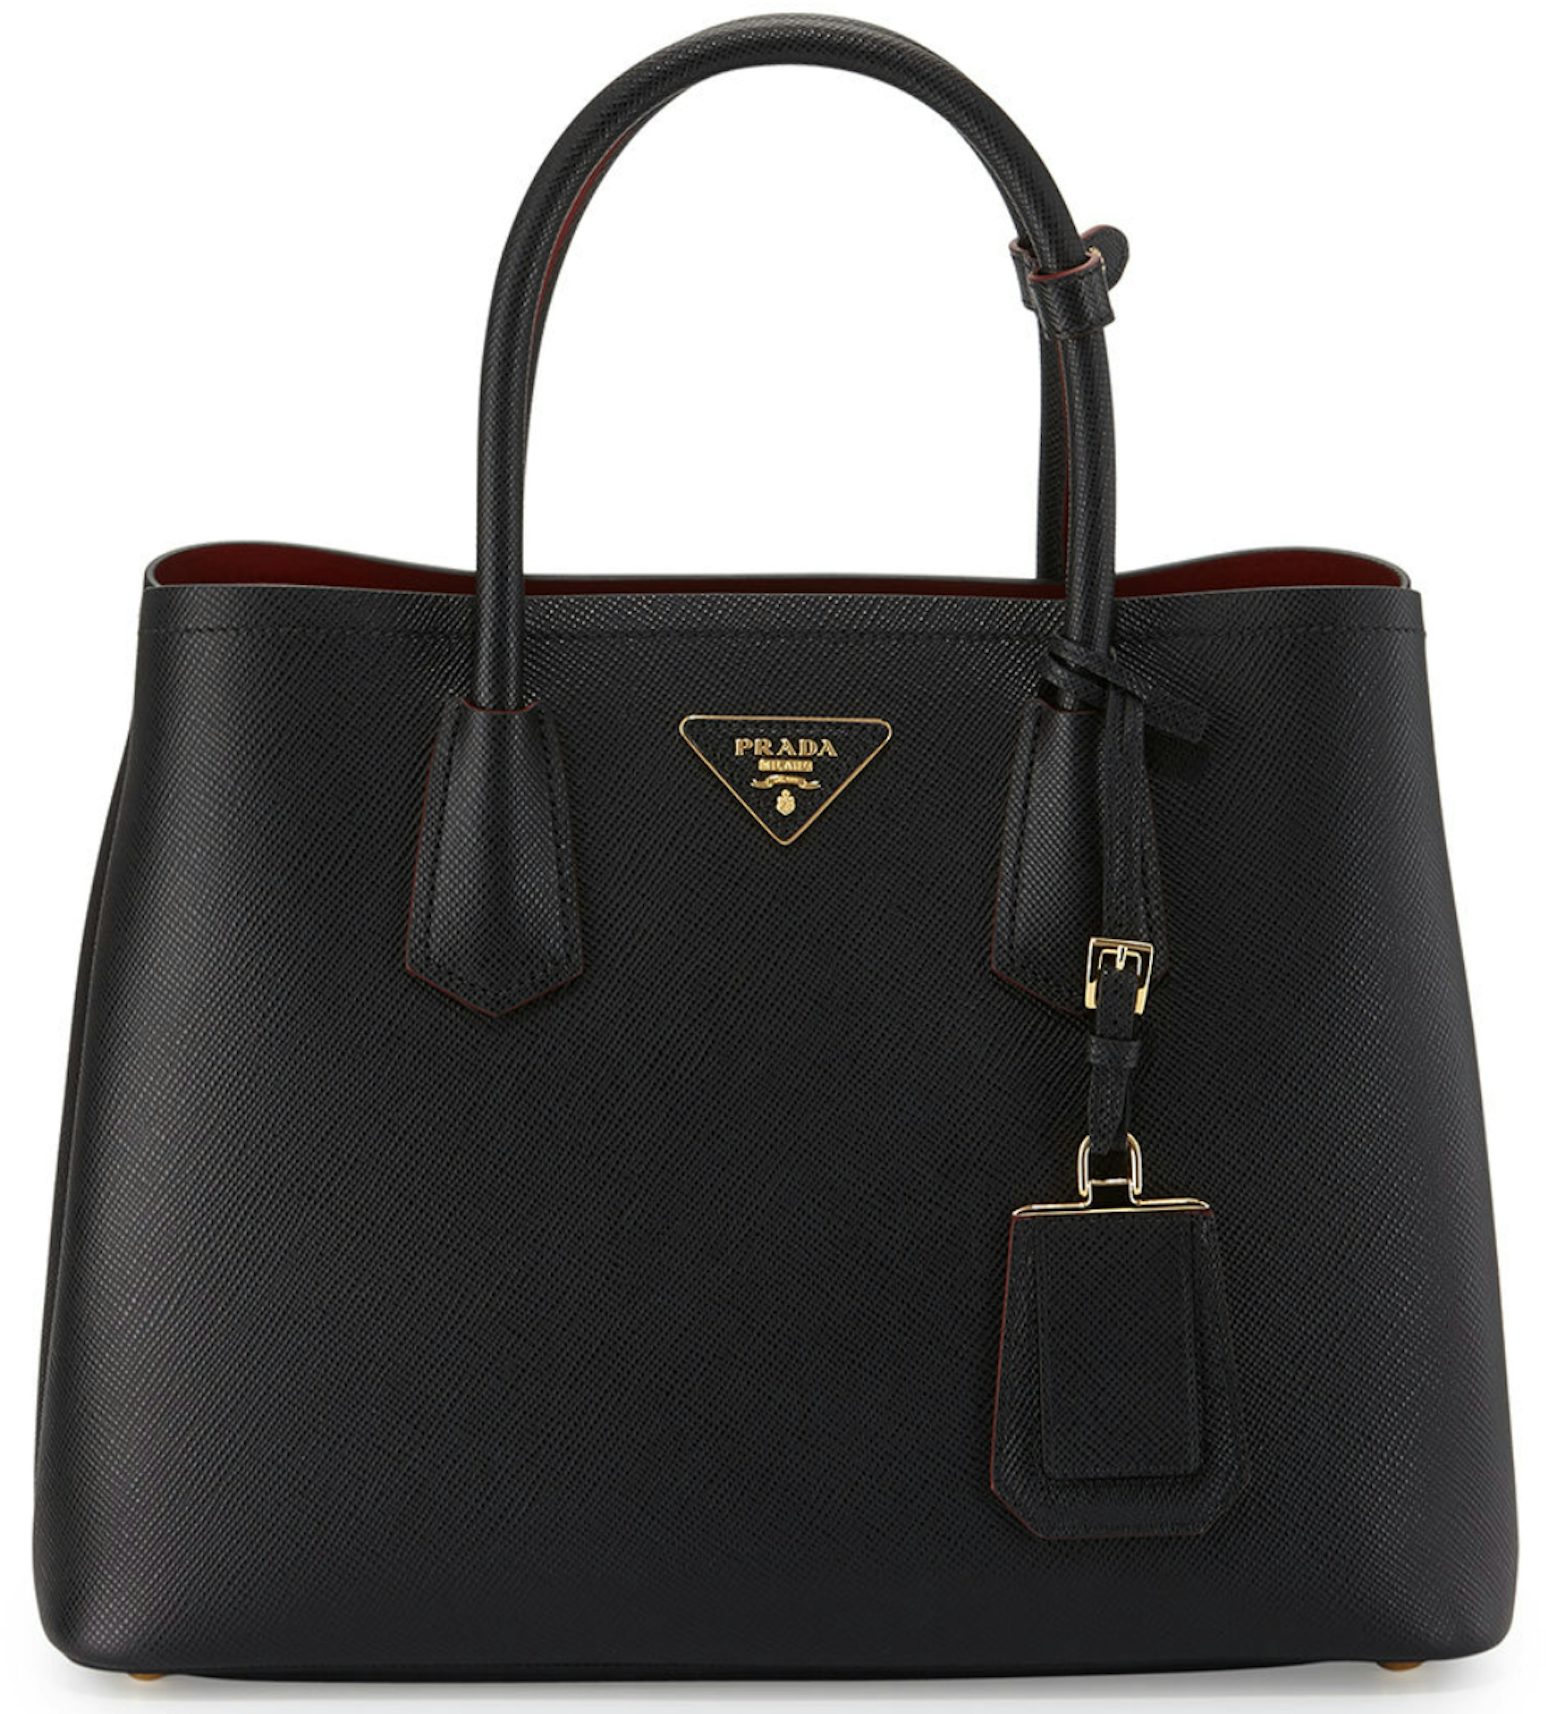 PRADA Medium Saffiano Leather Double Bag Black/ Red - New with Tags bought  05/22